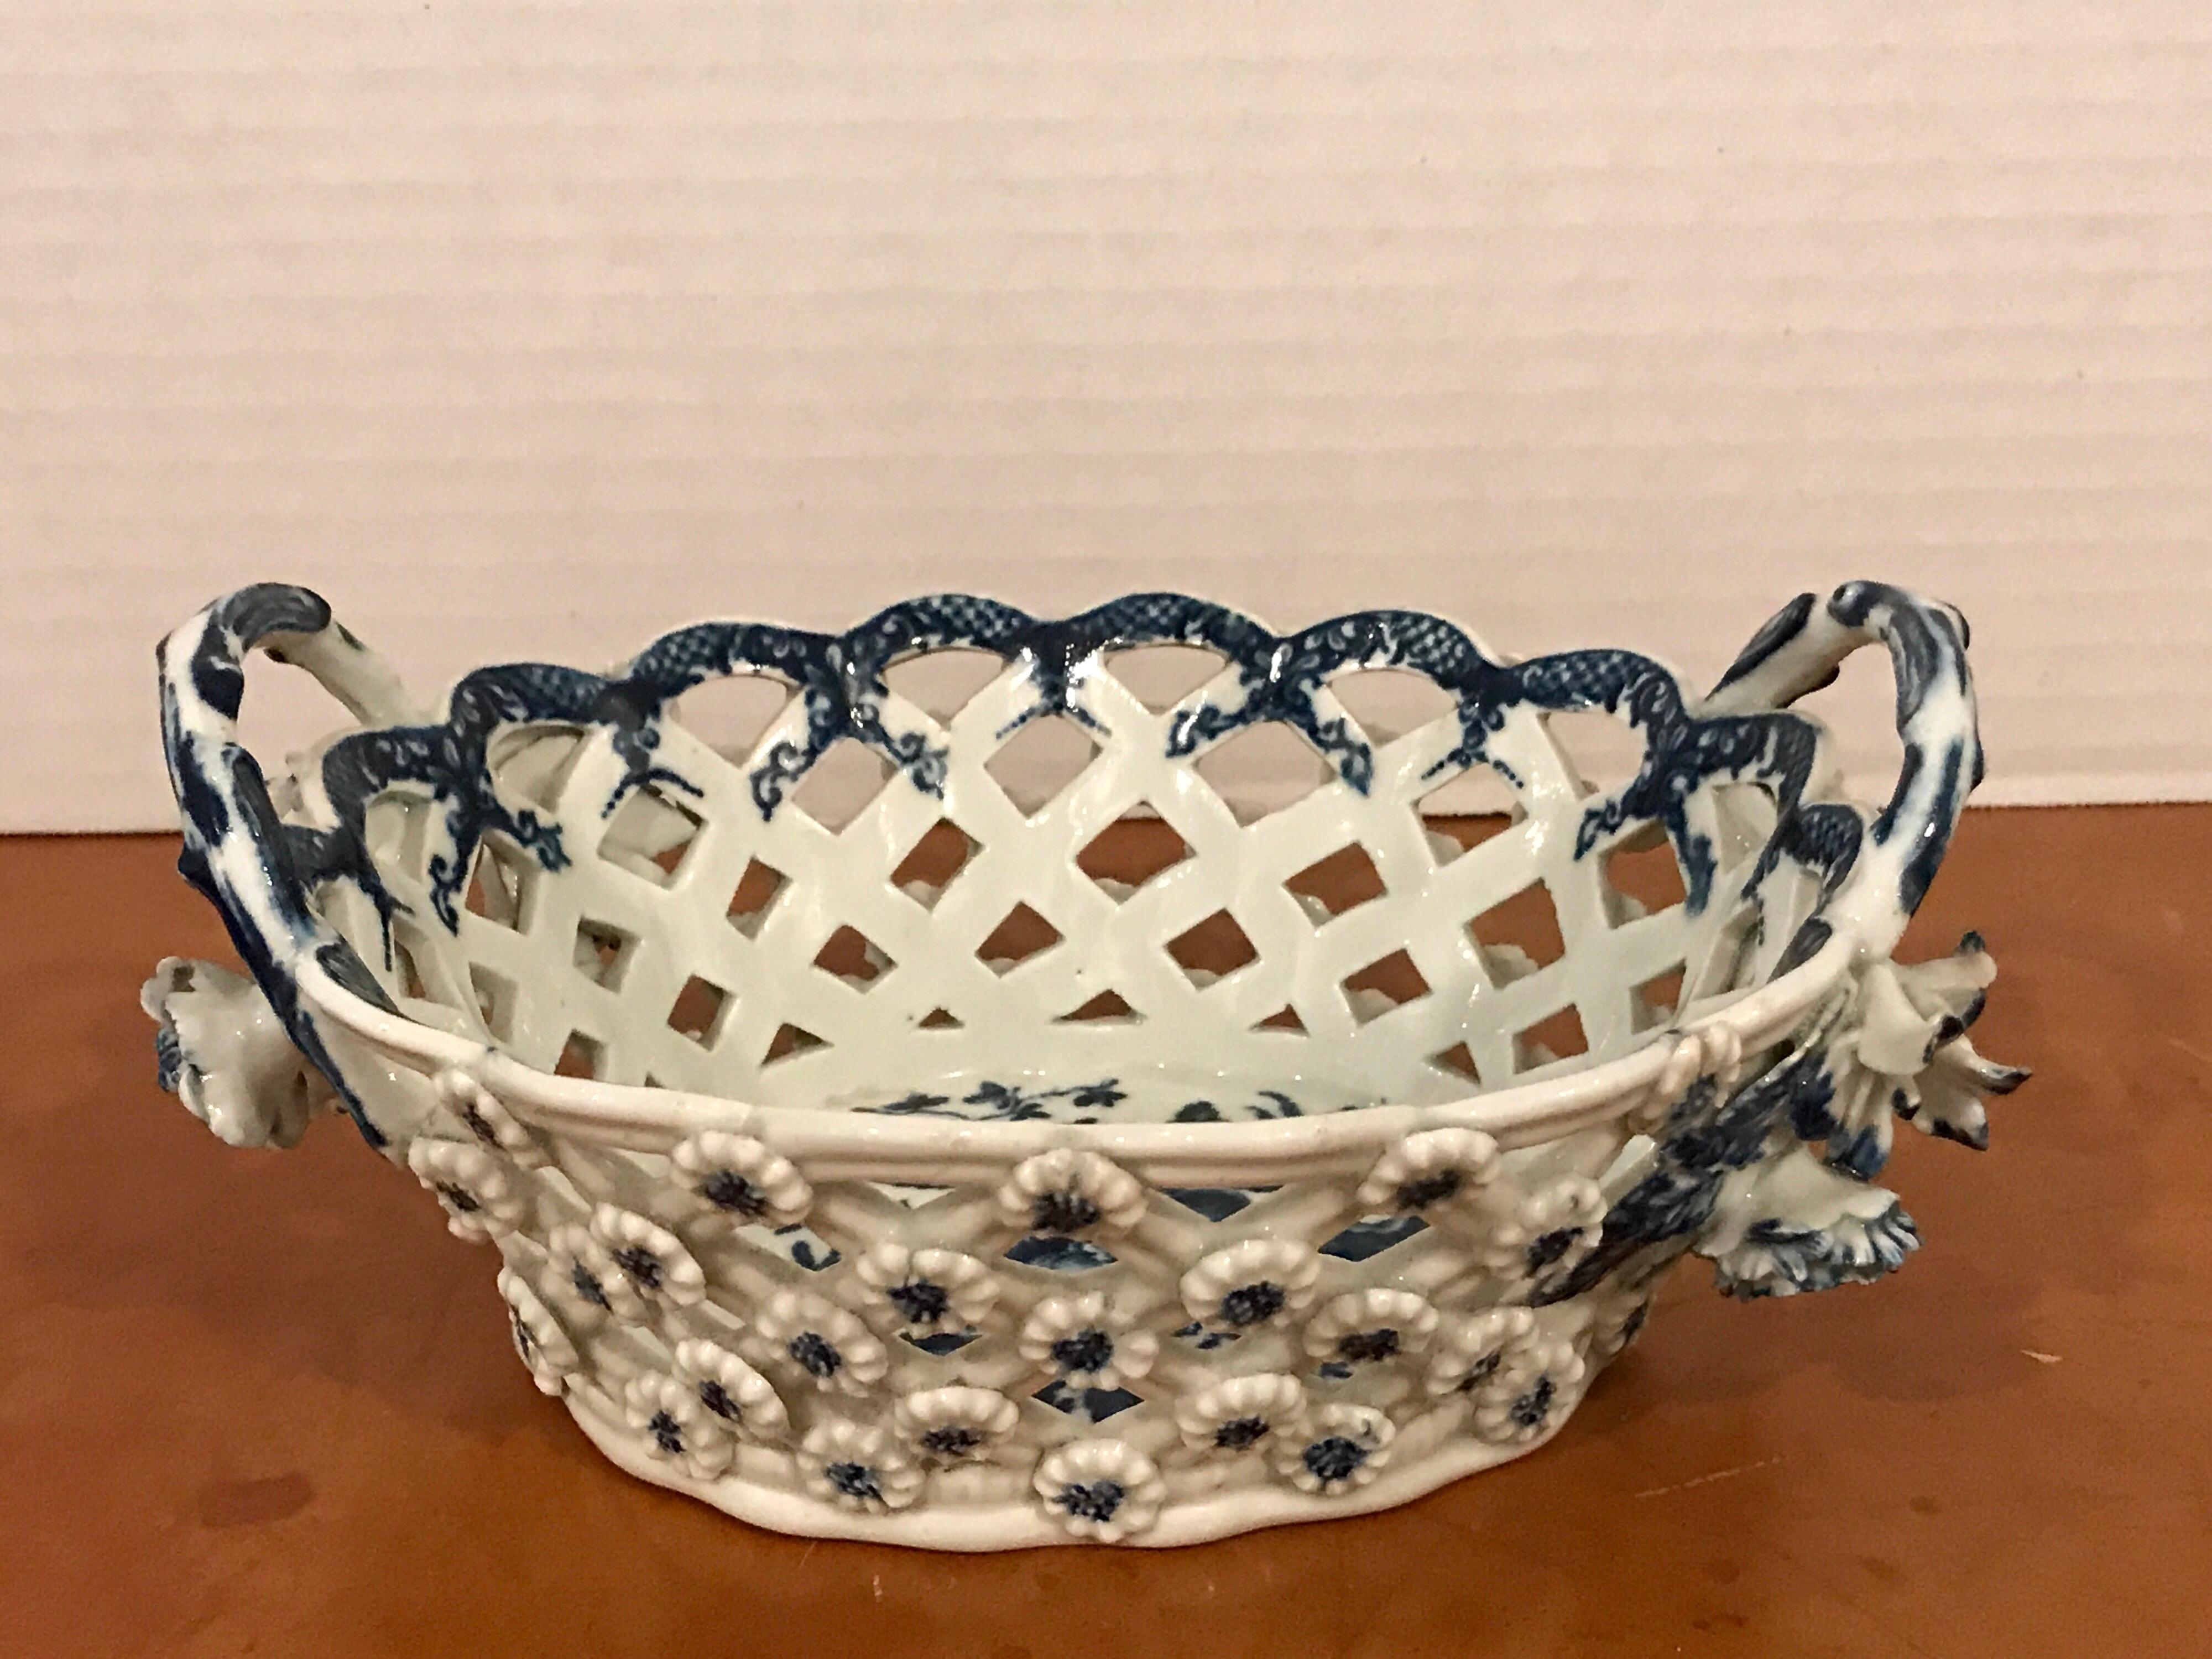 Dr. Wall period Worcester porcelain blue and white basket, England, 18th century, of oval form with scalloped rim and pierced basket weave sides and twisted twig handles, the exterior adorned with florets, underglaze blue interior with fruit and